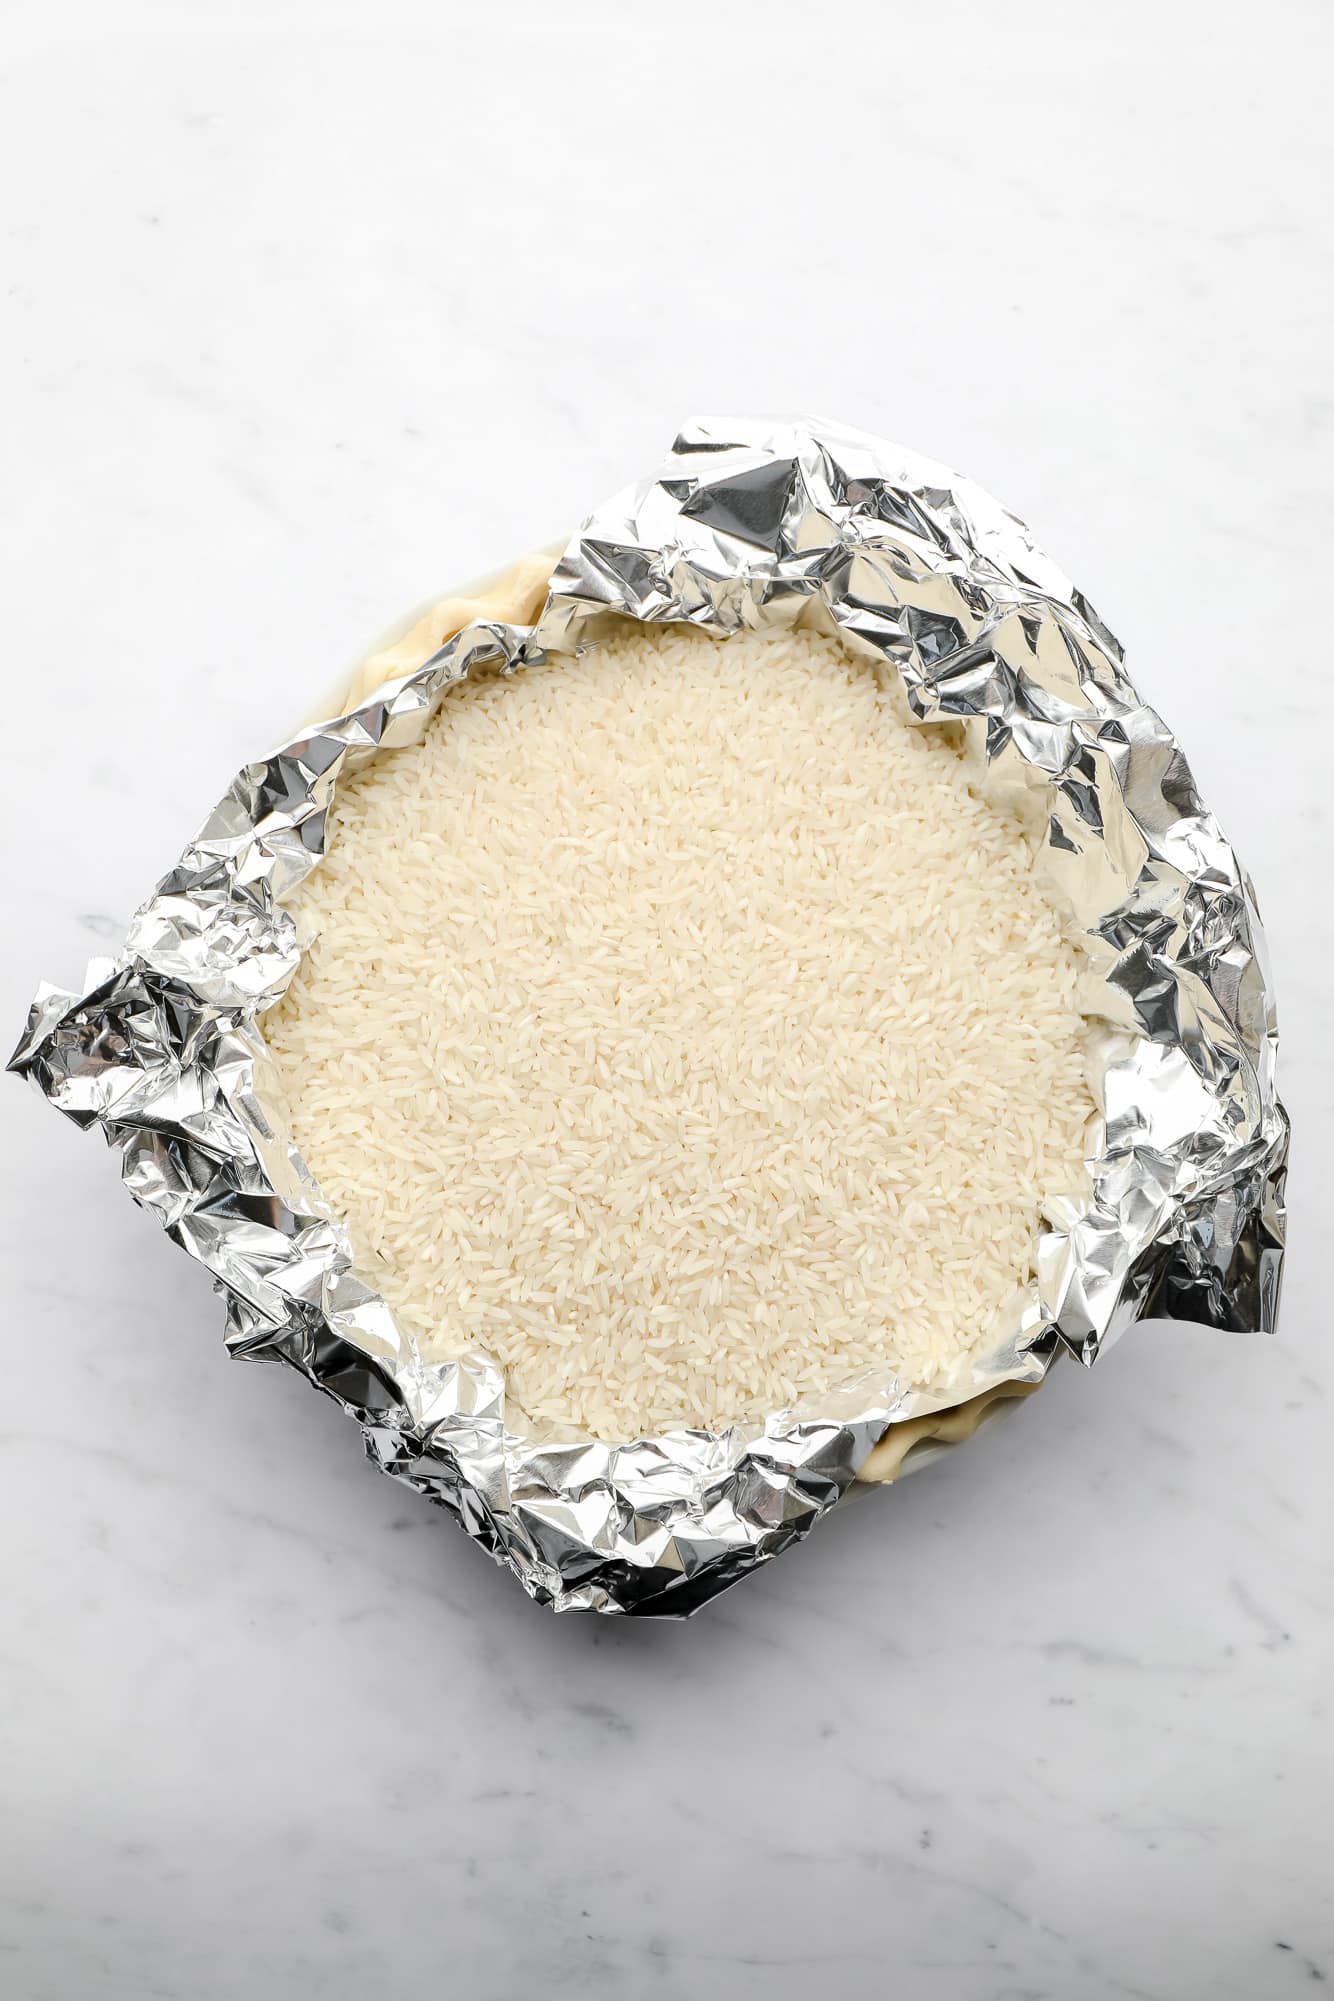 pie crust being baked in a pie plate with a layer of tinfoil and white rice on top.